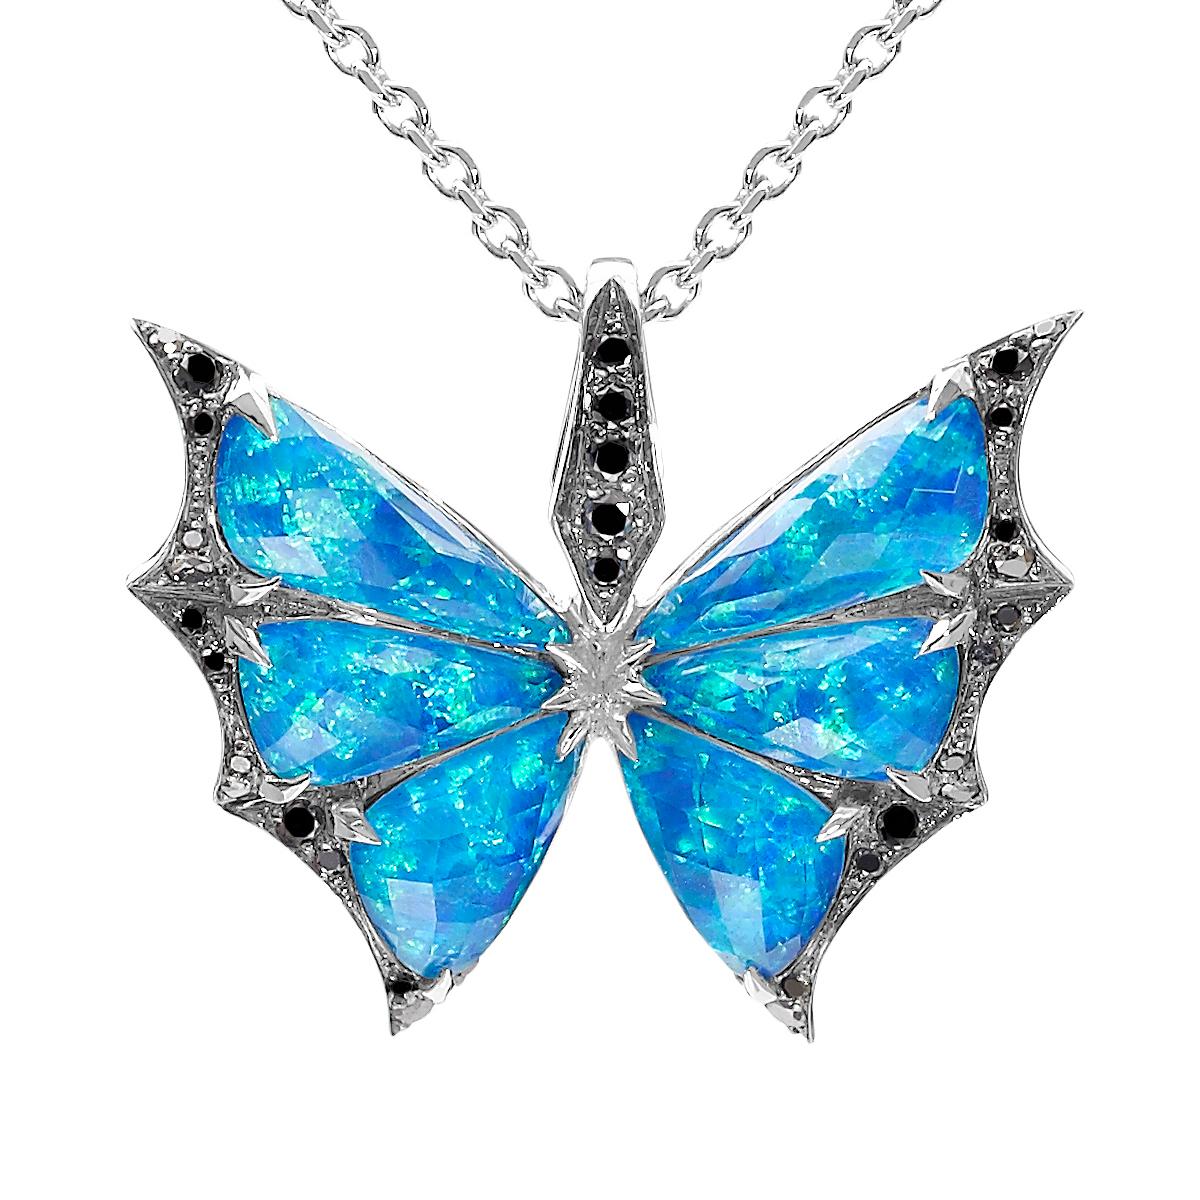 This delightful 'Fly By Night' Crystal Haze Small Pendant is handcrafted in timeless 18k white gold, unique black opalescent with clear quartz Crystal Haze (5.12 carats) and elegant 0.19 carat black diamond pavé. This piece is perfect to wear both